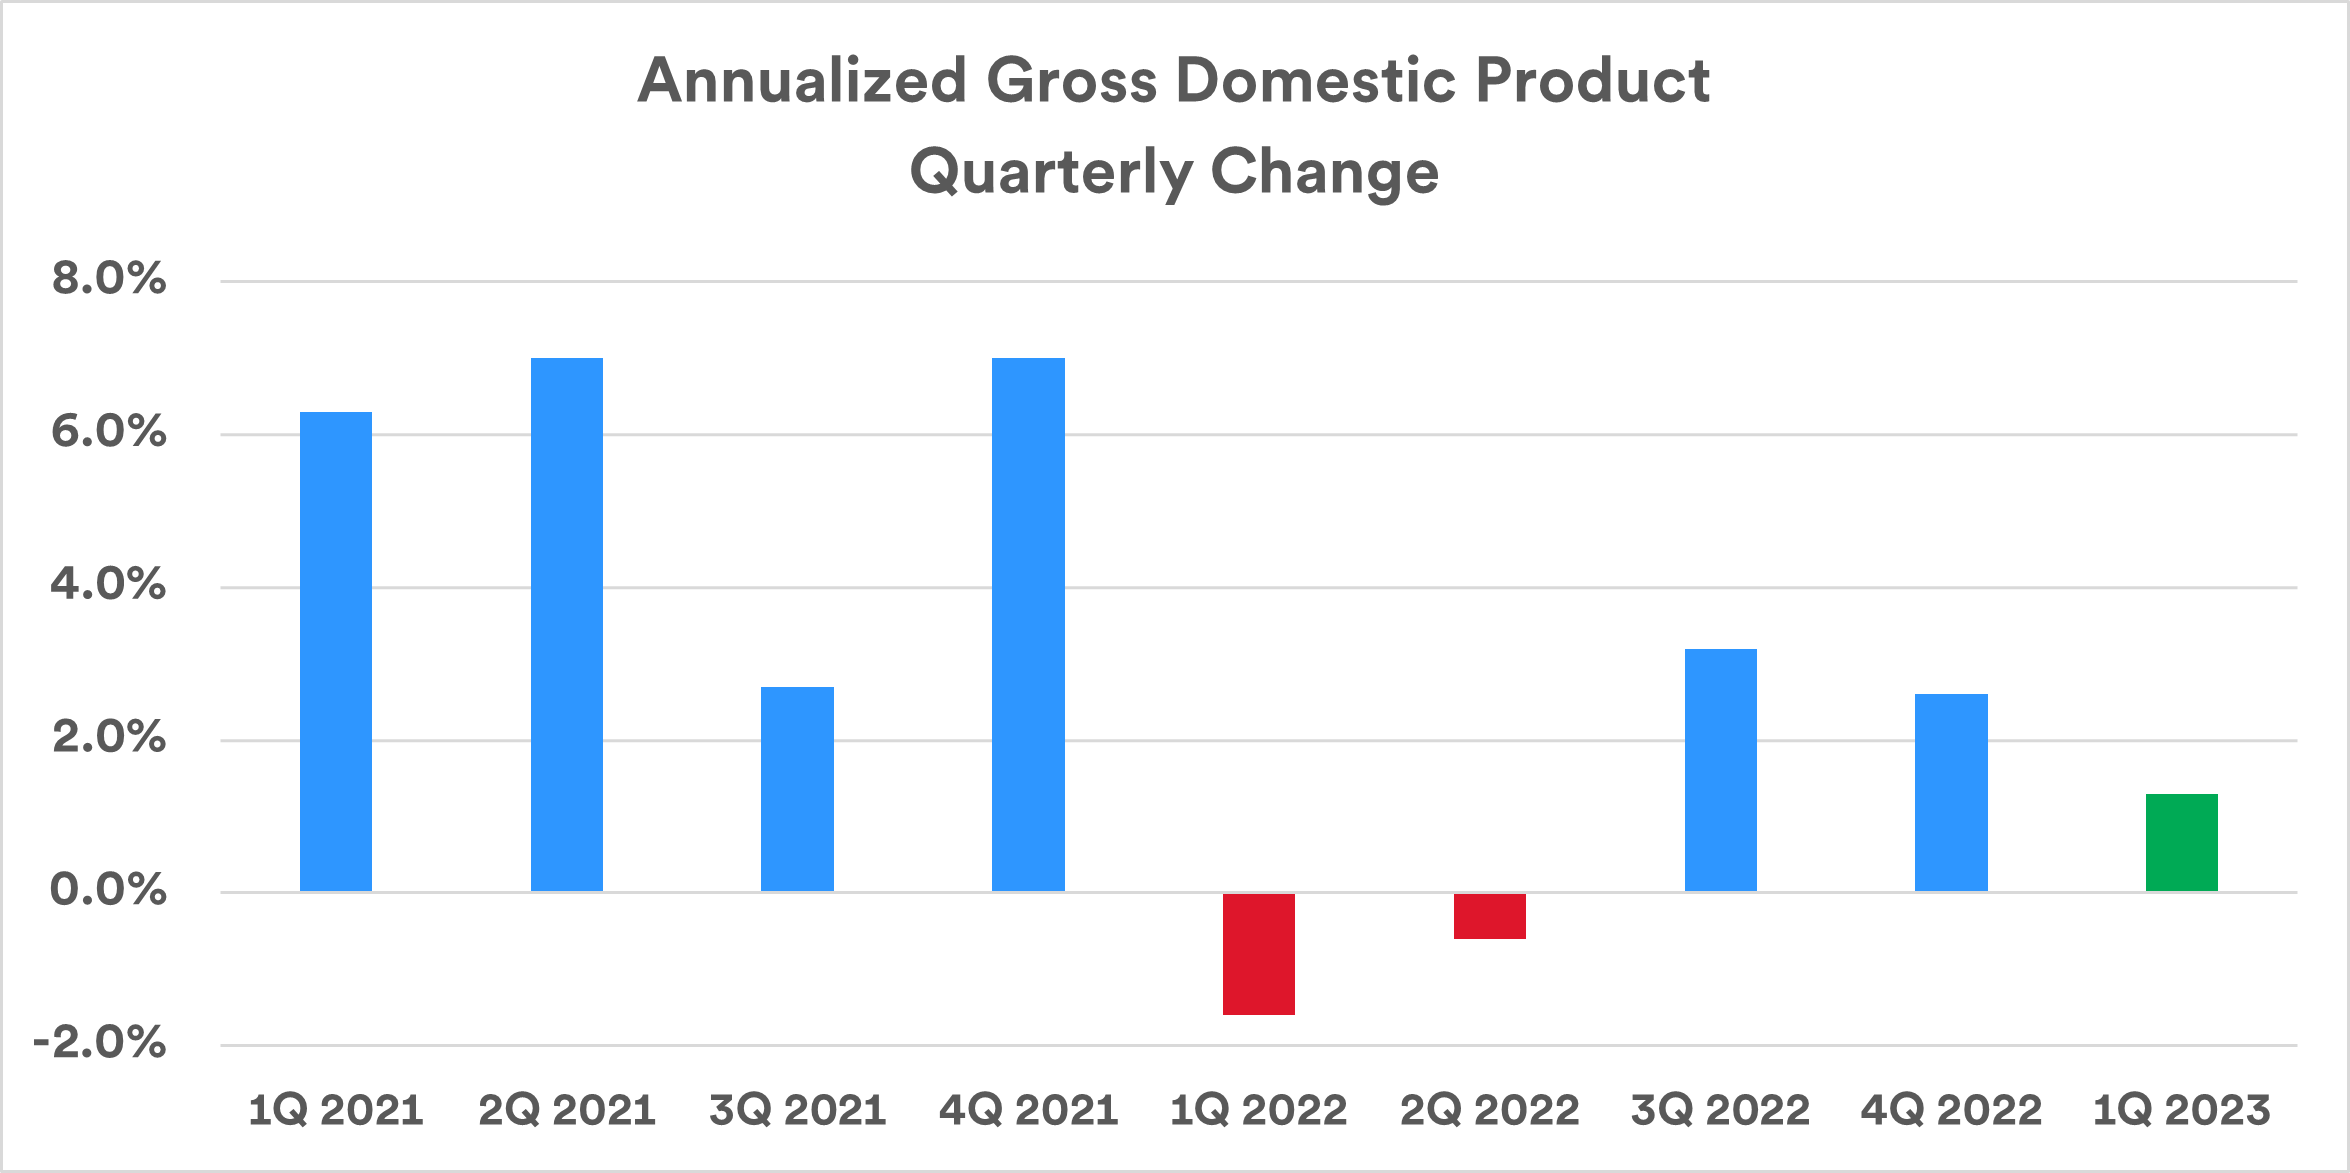 chart depicts U.S. annualized quarterly gross domestic product, or GDP, which is a measure of total economic output. 